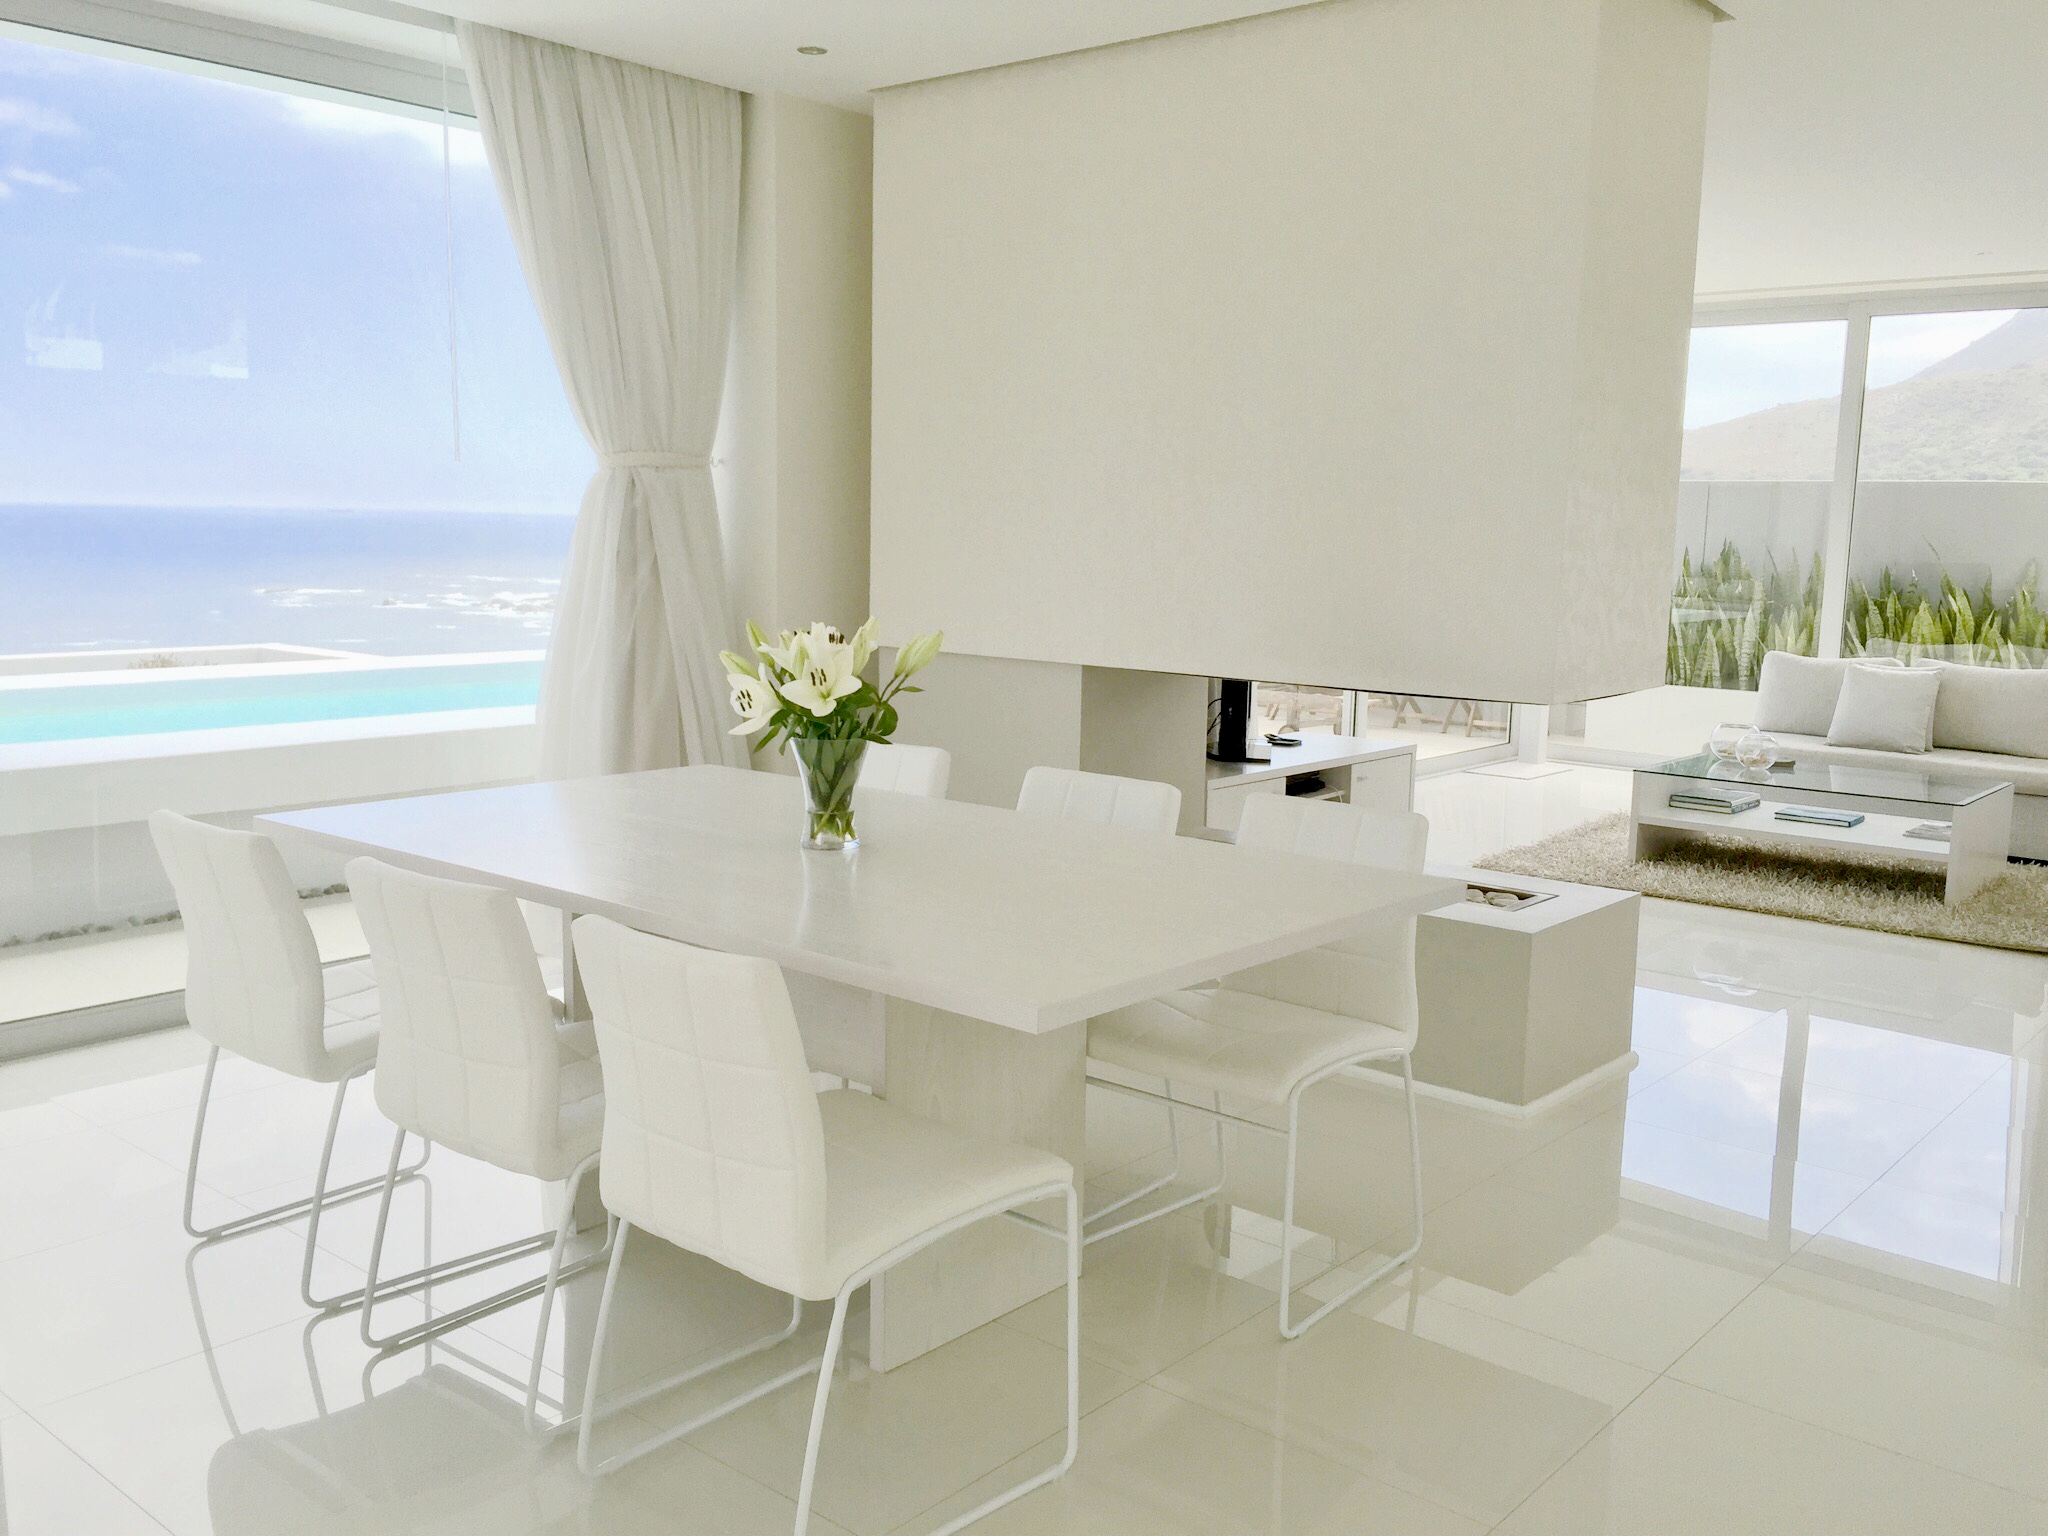 Penthouse Dining